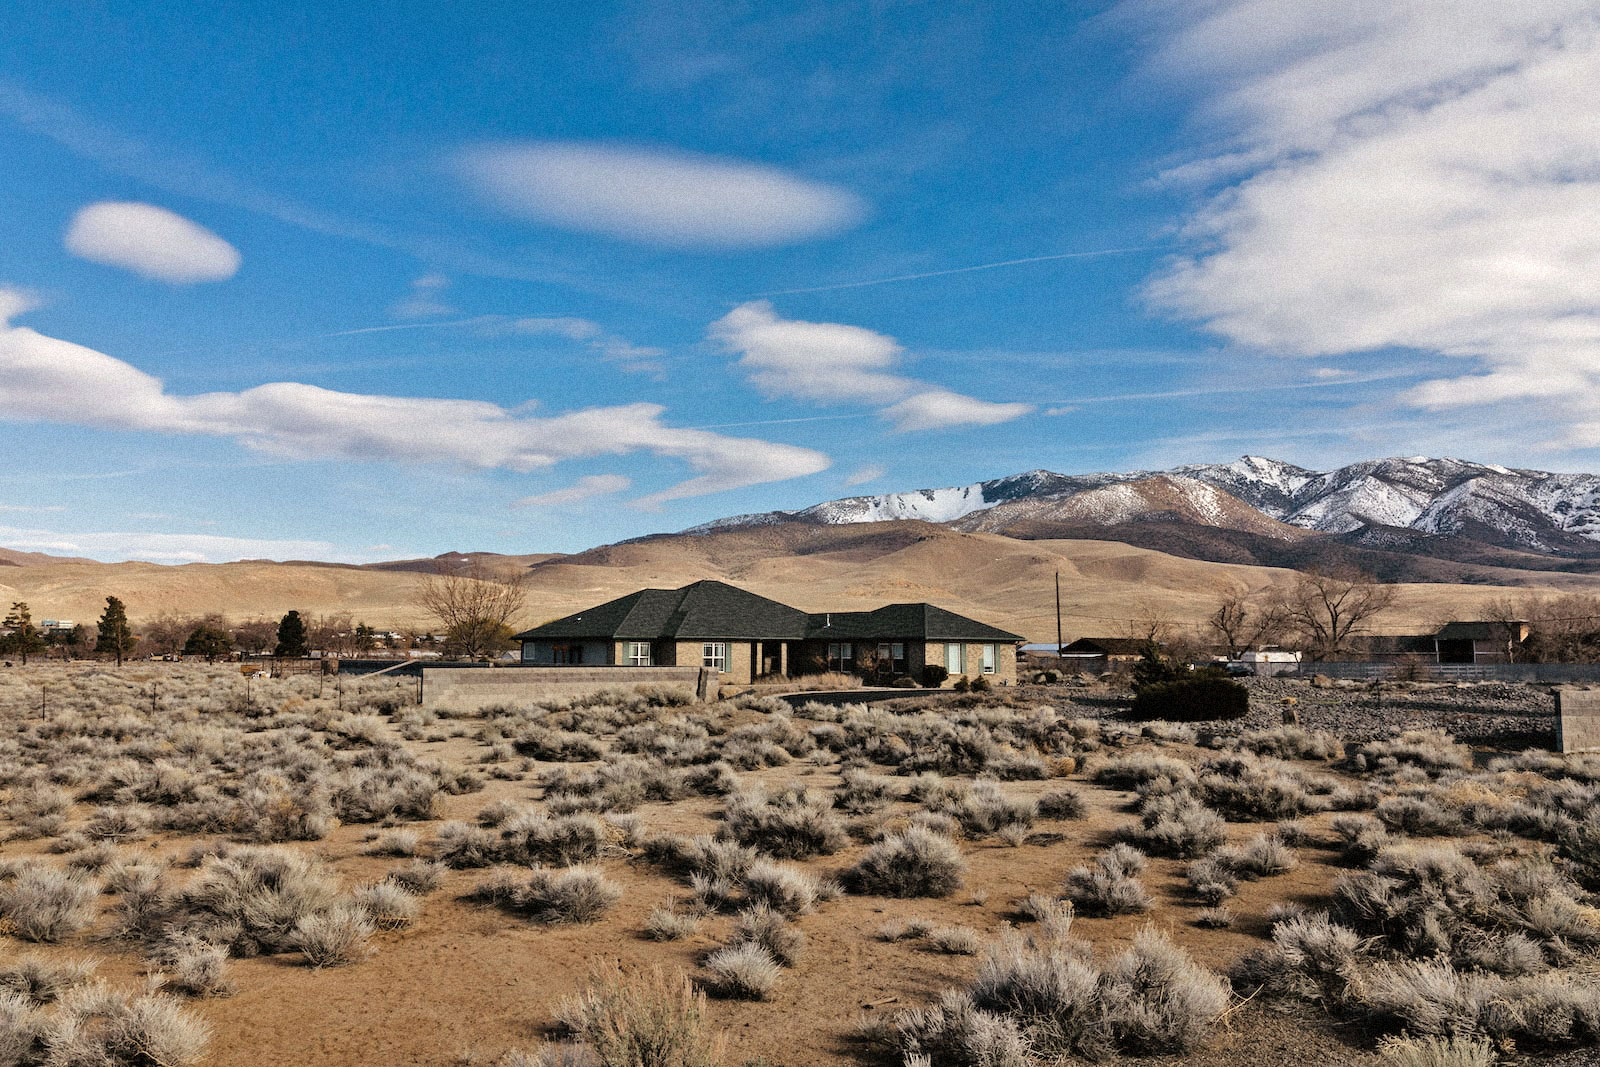 a ranch-style house in the middle of a dry landscape